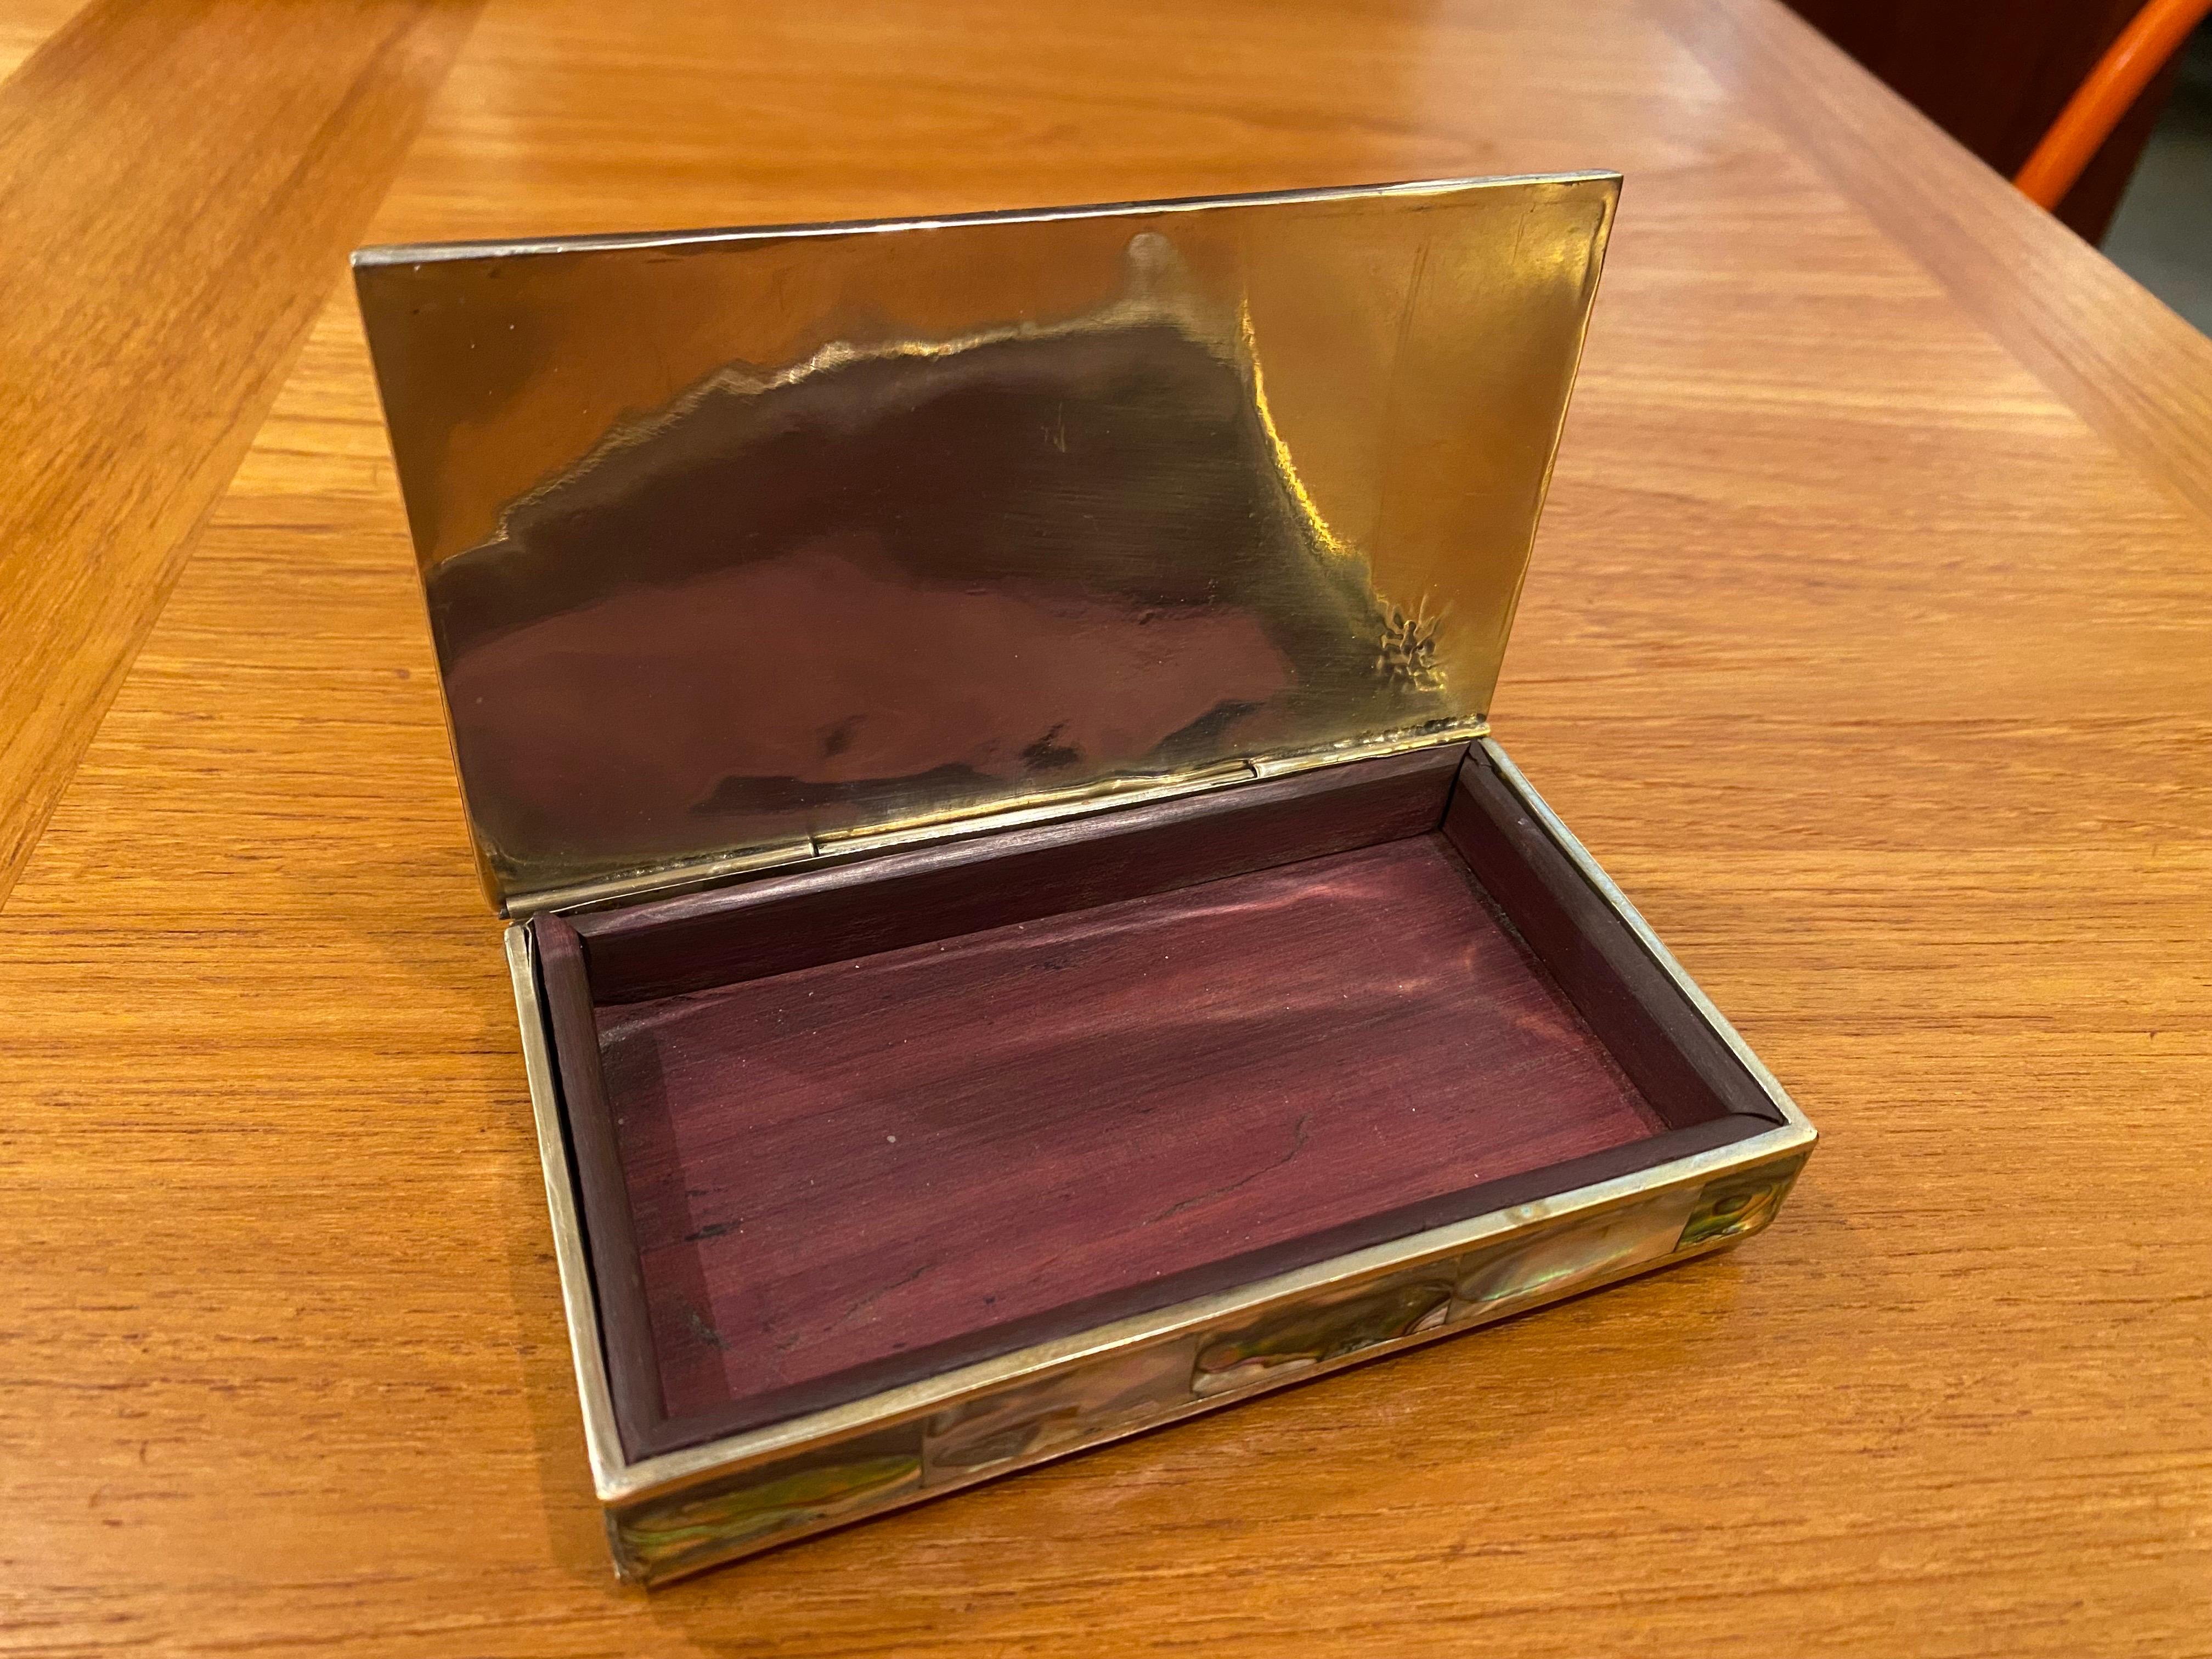 Mexican silver box with Mother-of-Pearl Inlay. Lid opens to a wood lined interior. Very nicely done and a really beautiful object!